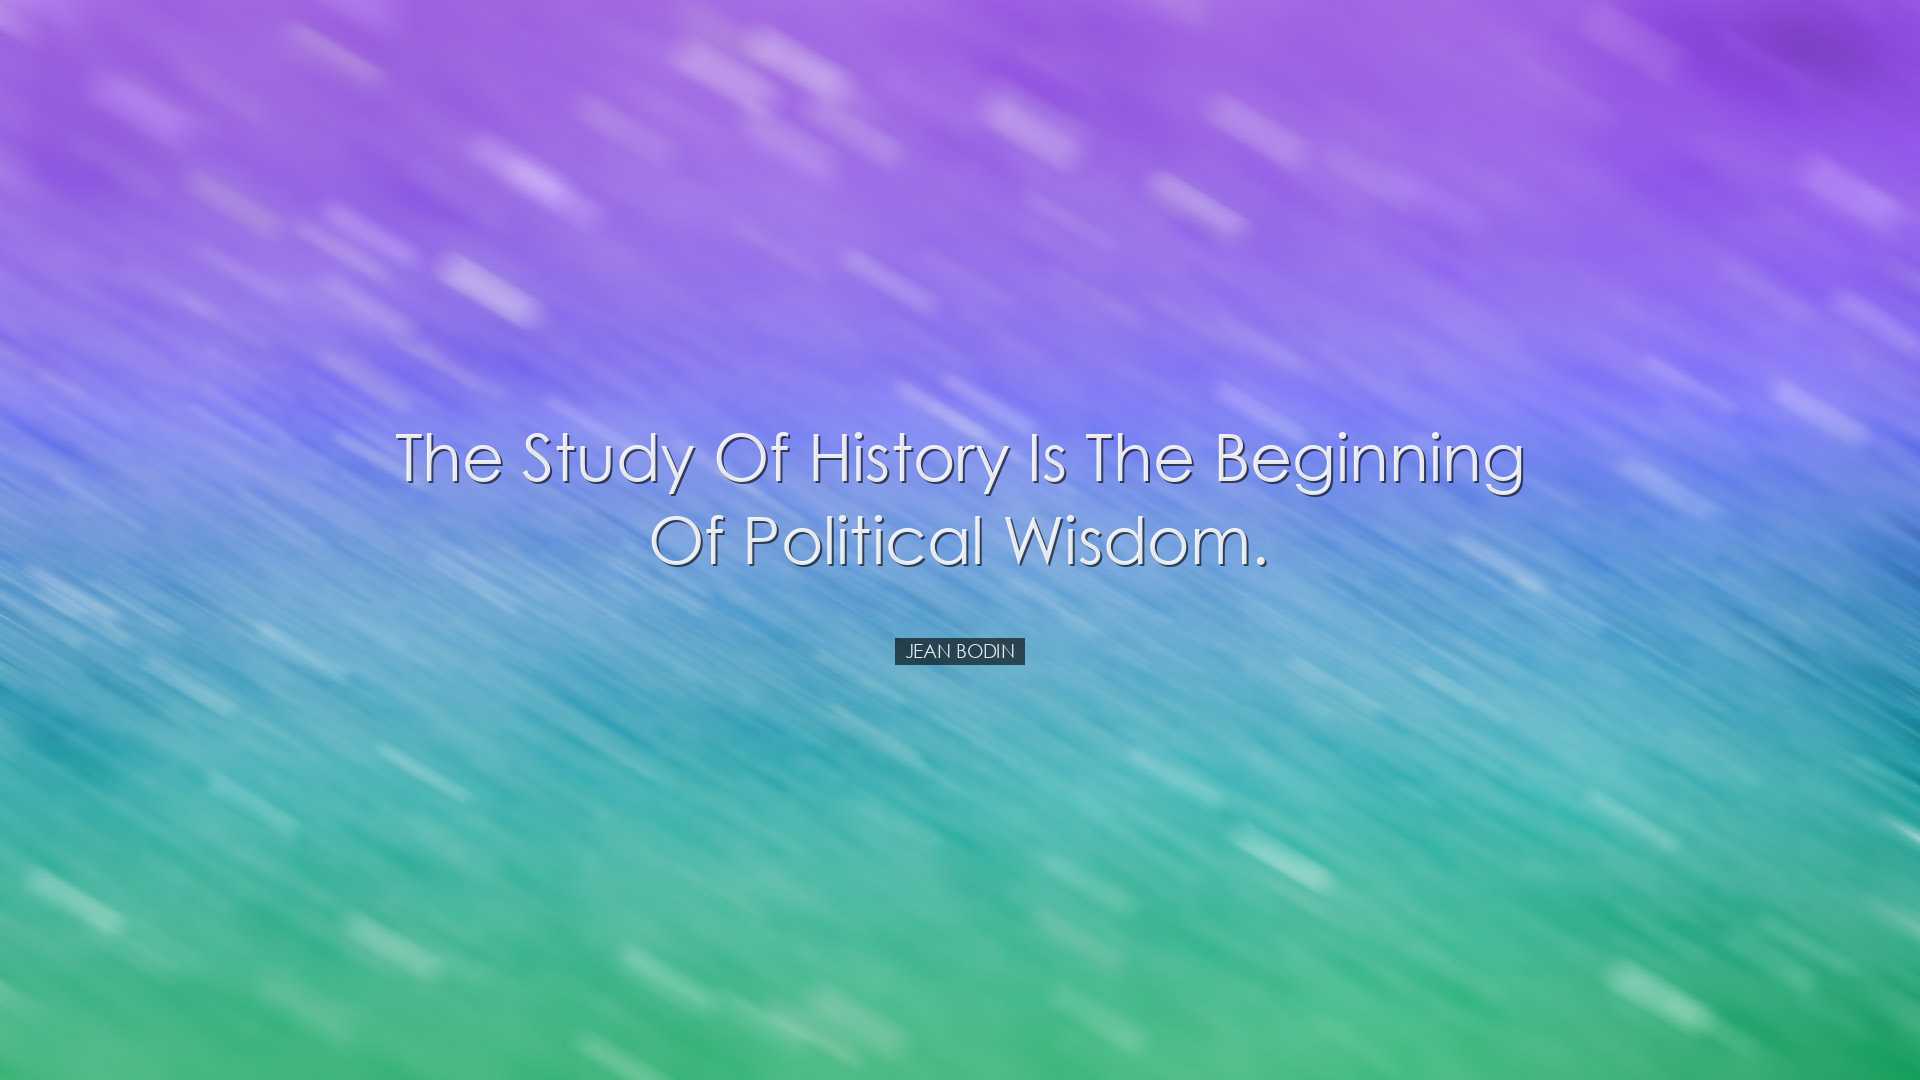 The study of history is the beginning of political wisdom. - Jean